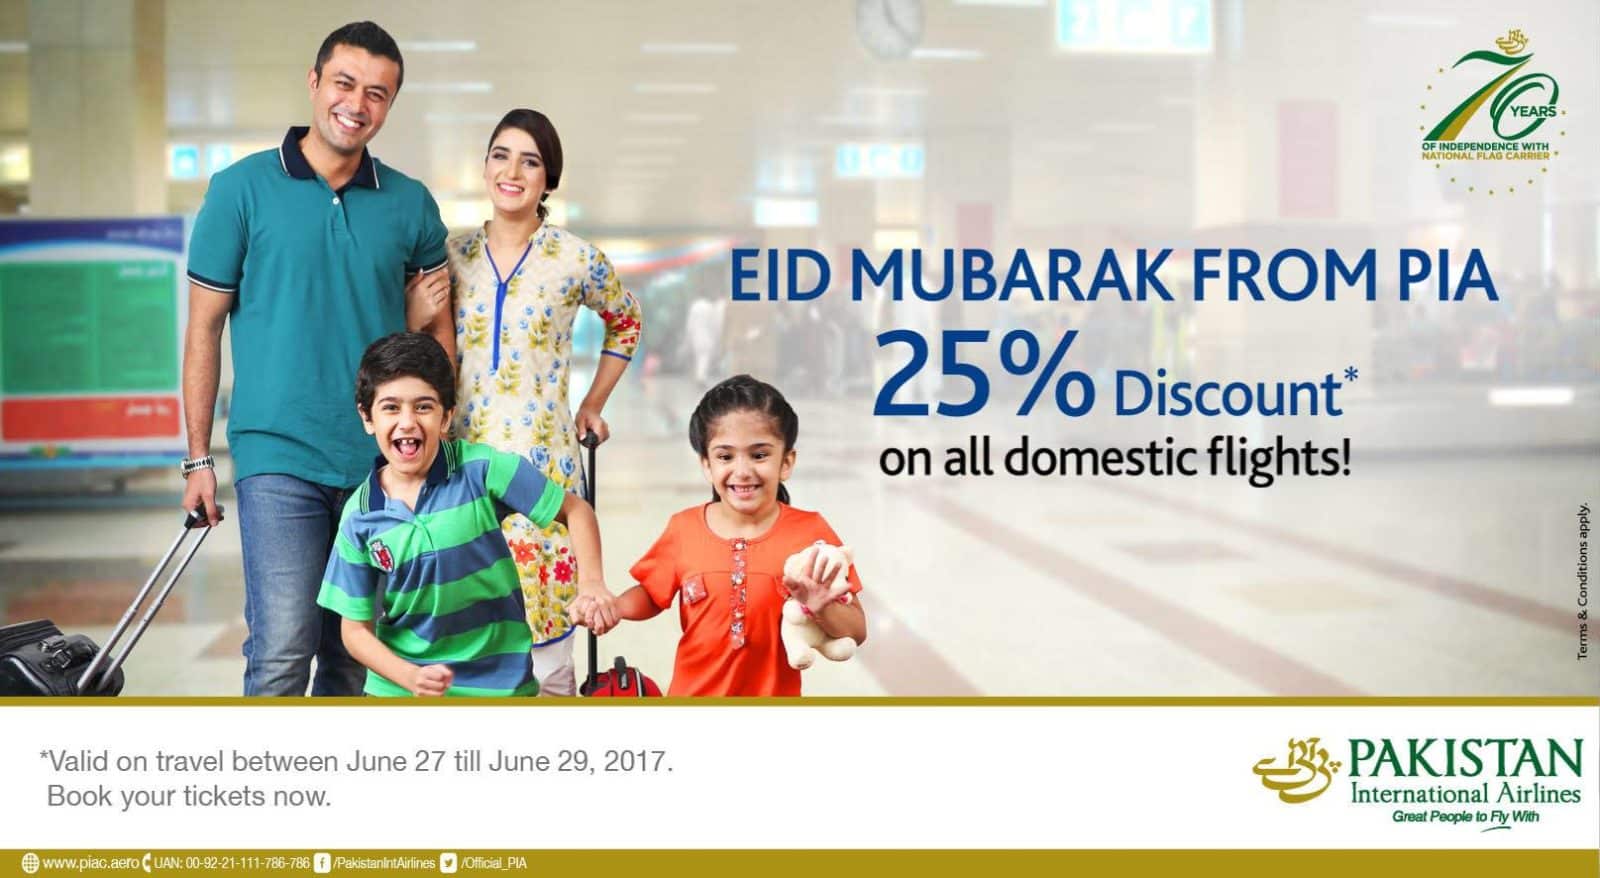 Eid Gift: PIA Offers 25% Discount on All Domestic Flights